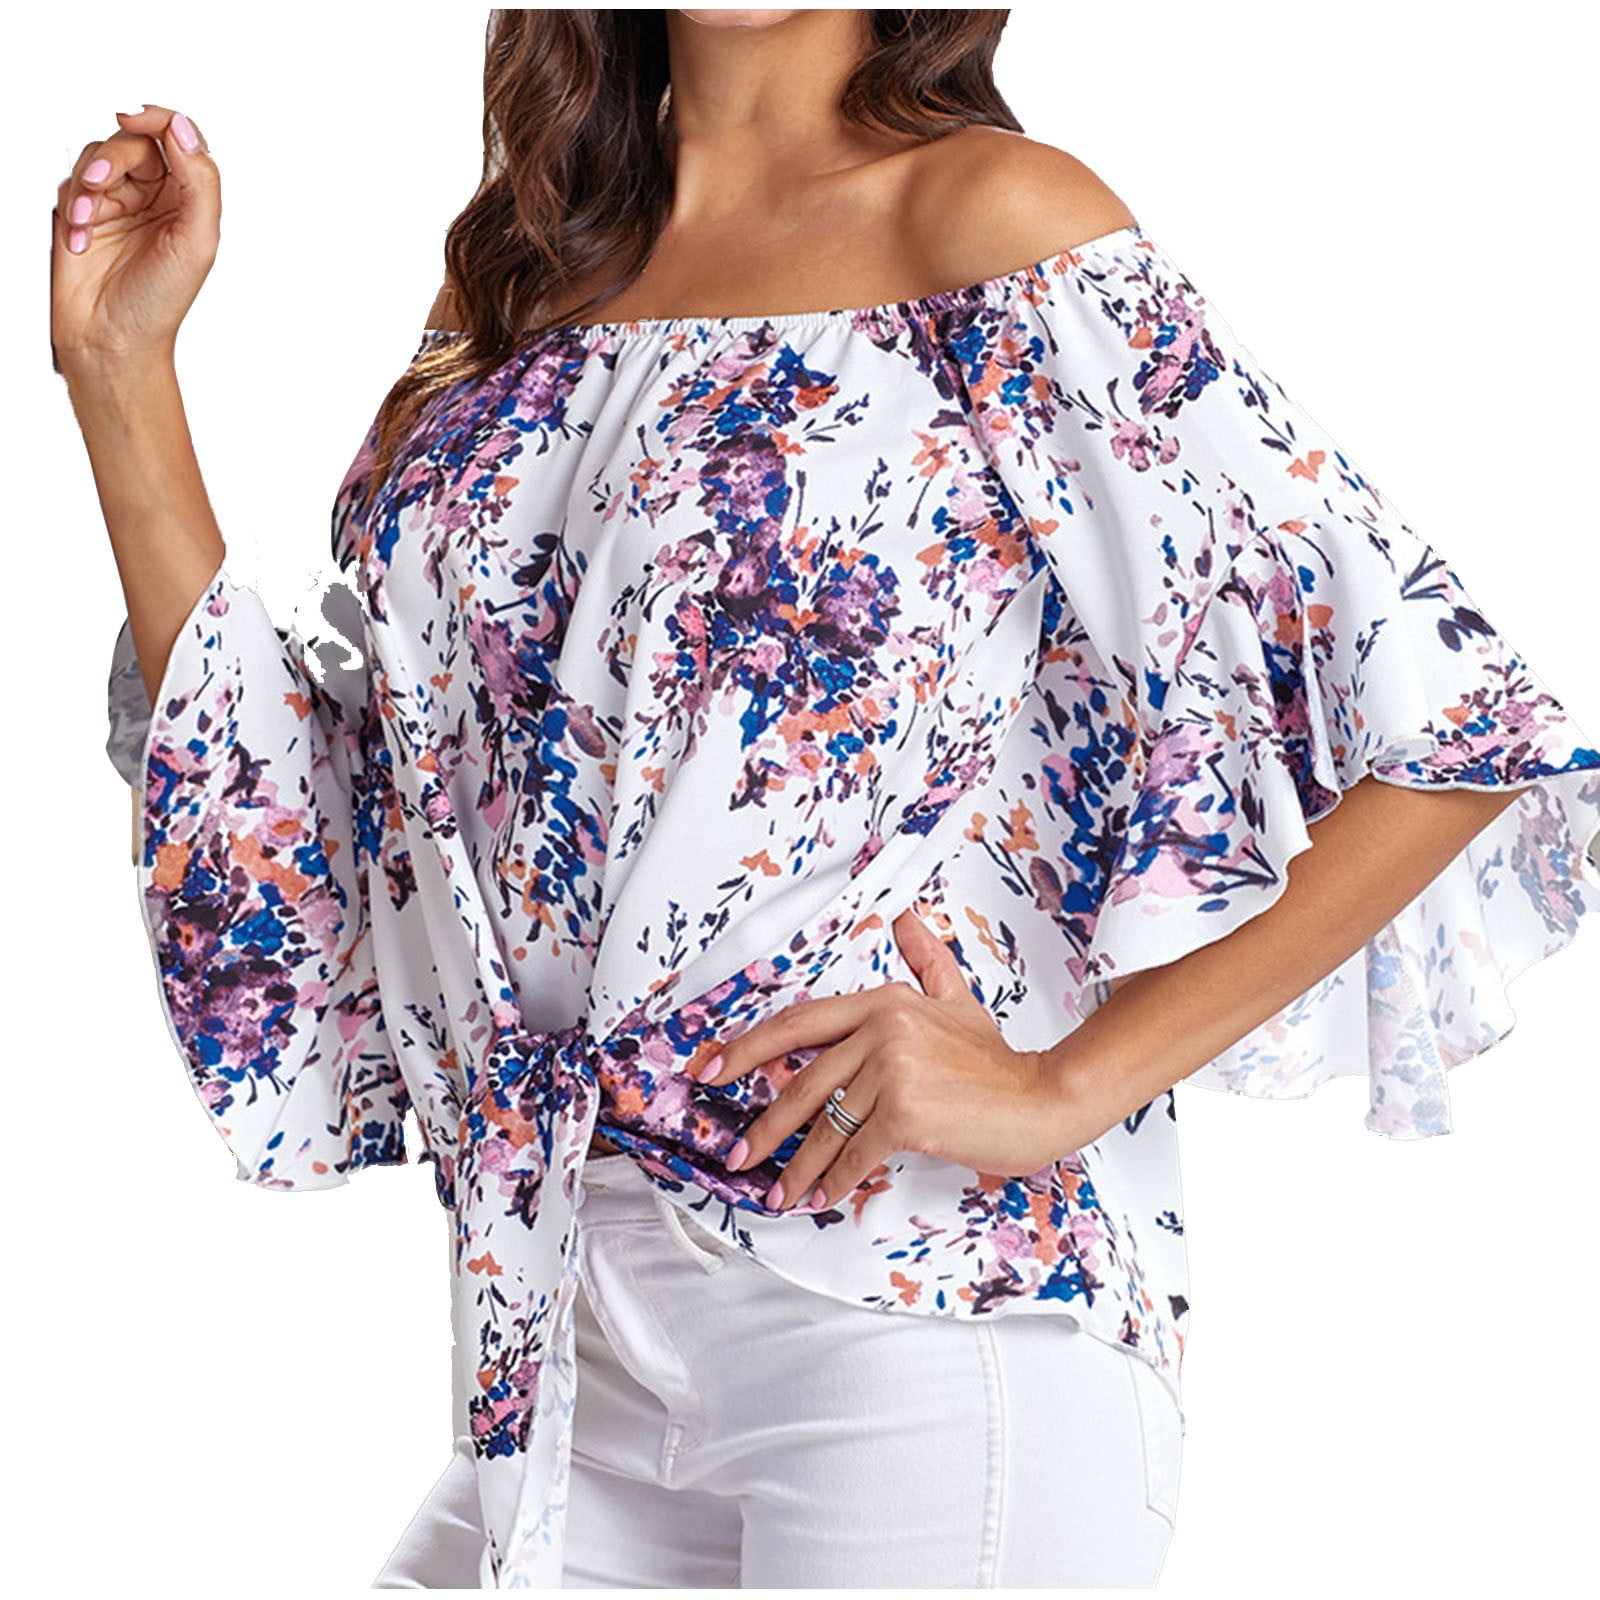 Summer Savings Clearance Womens Tops Off Shoulder Tops 3/4, 41% OFF